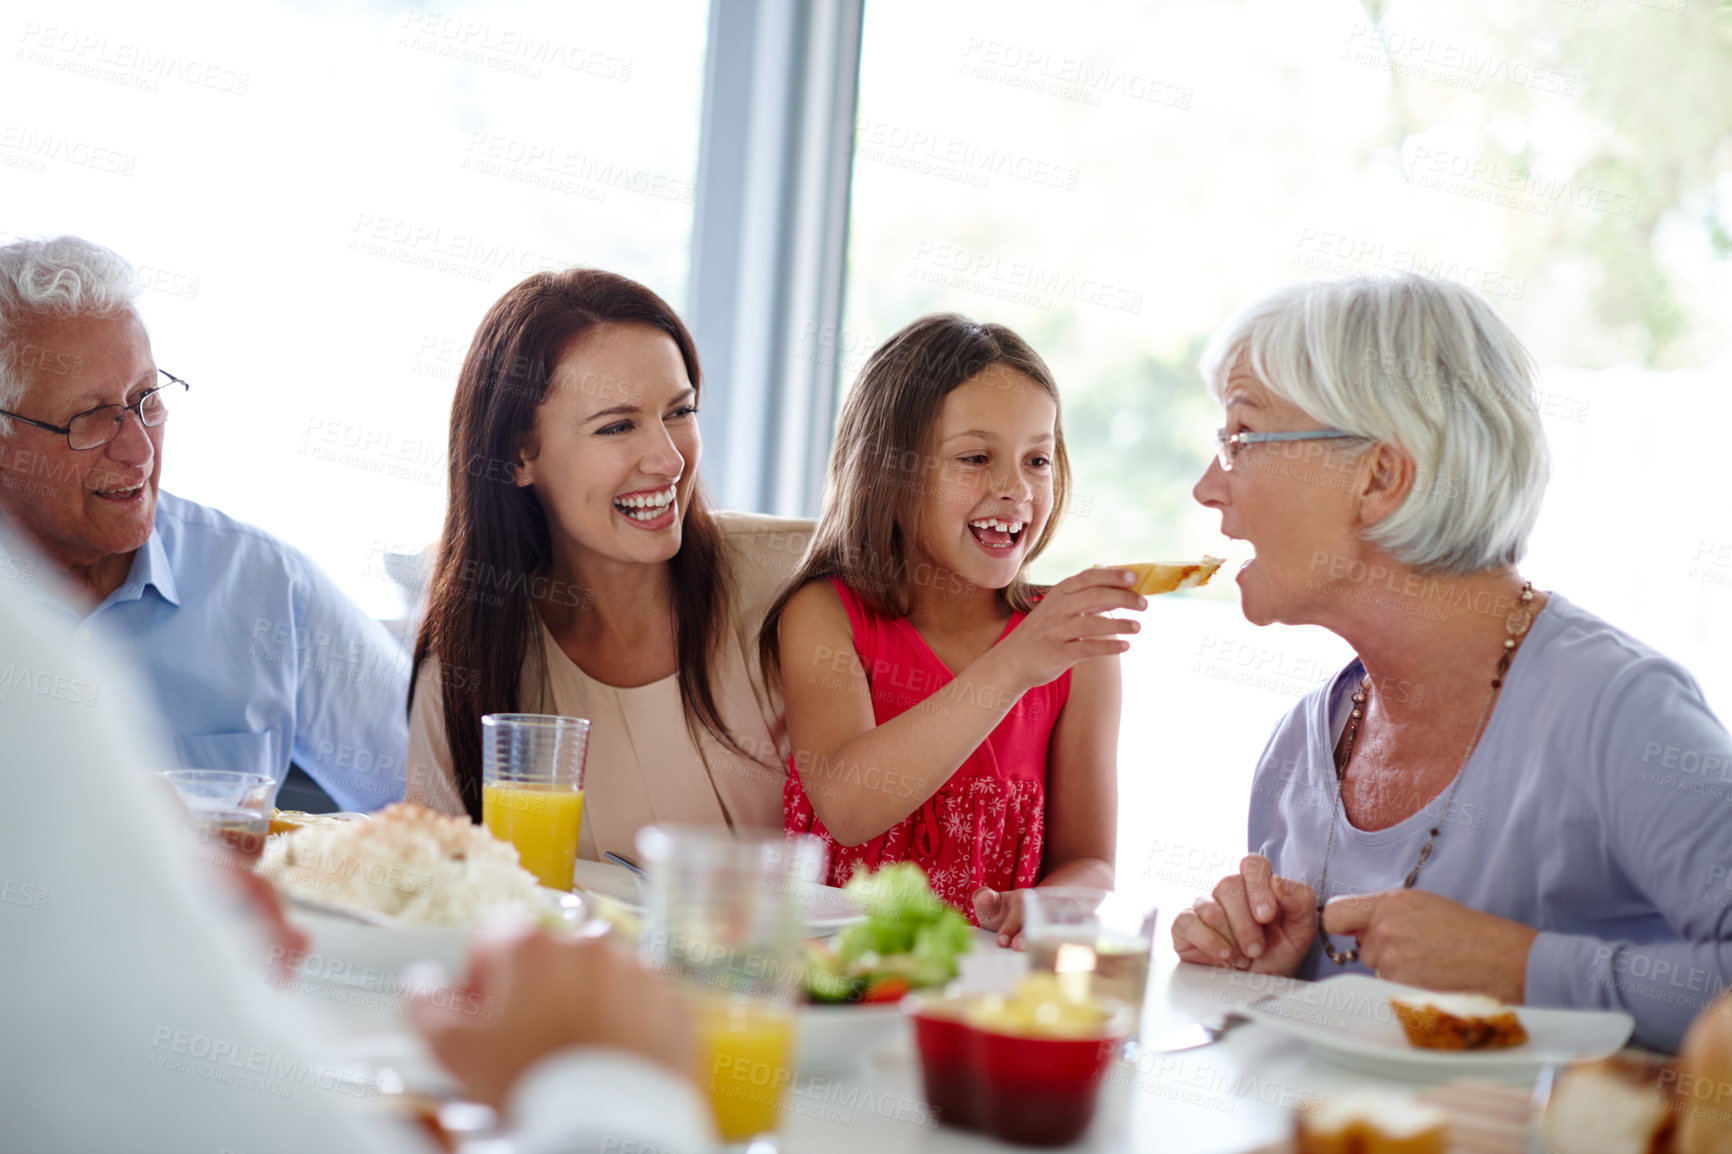 Buy stock photo Shot of a happy multi-generational family having a meal together